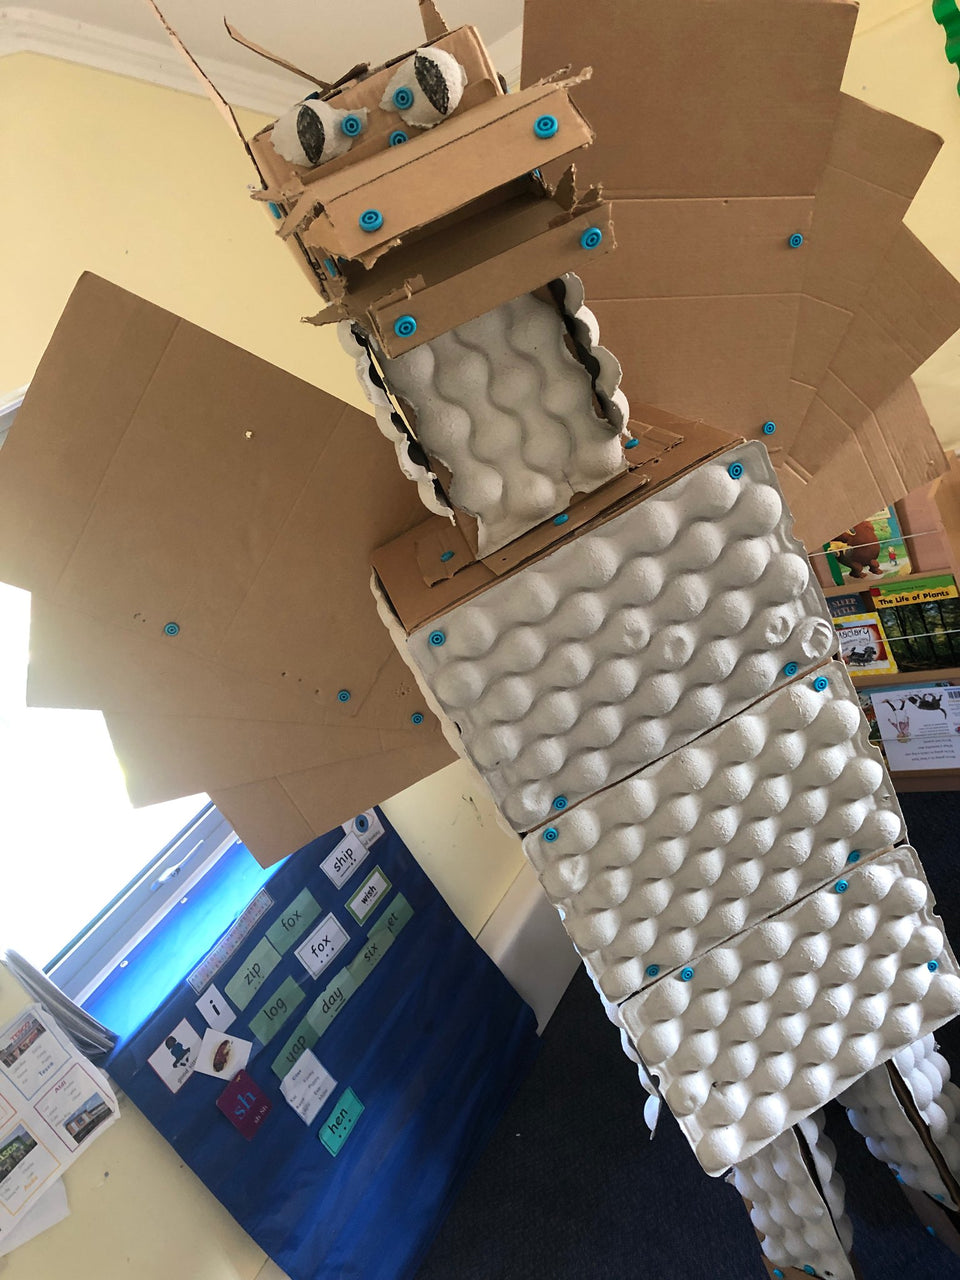 Giant cardboard dragon built with cardboard egg crates and Makedo construction system